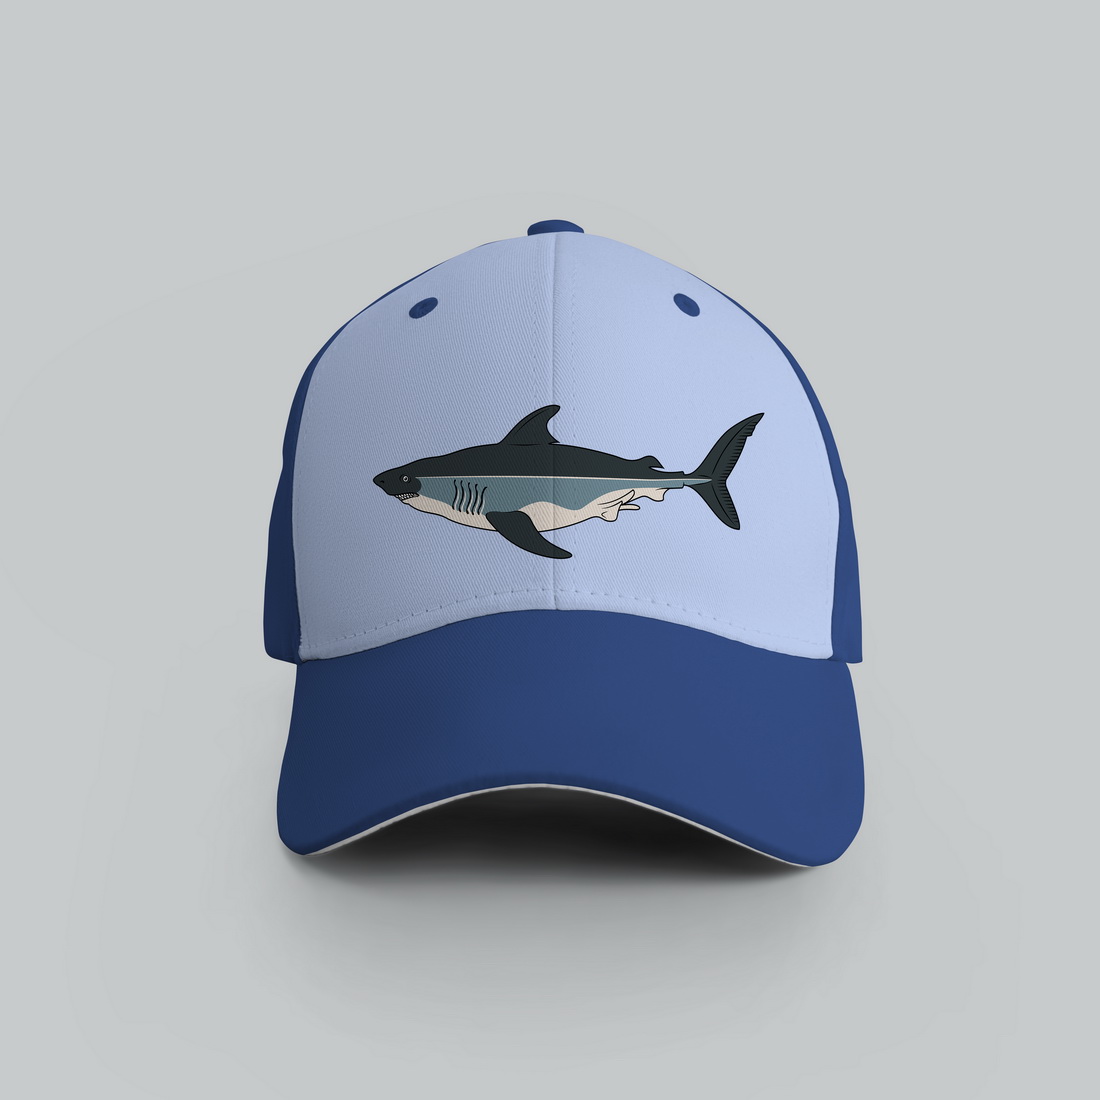 Picture of a cap with an amazing shark print.